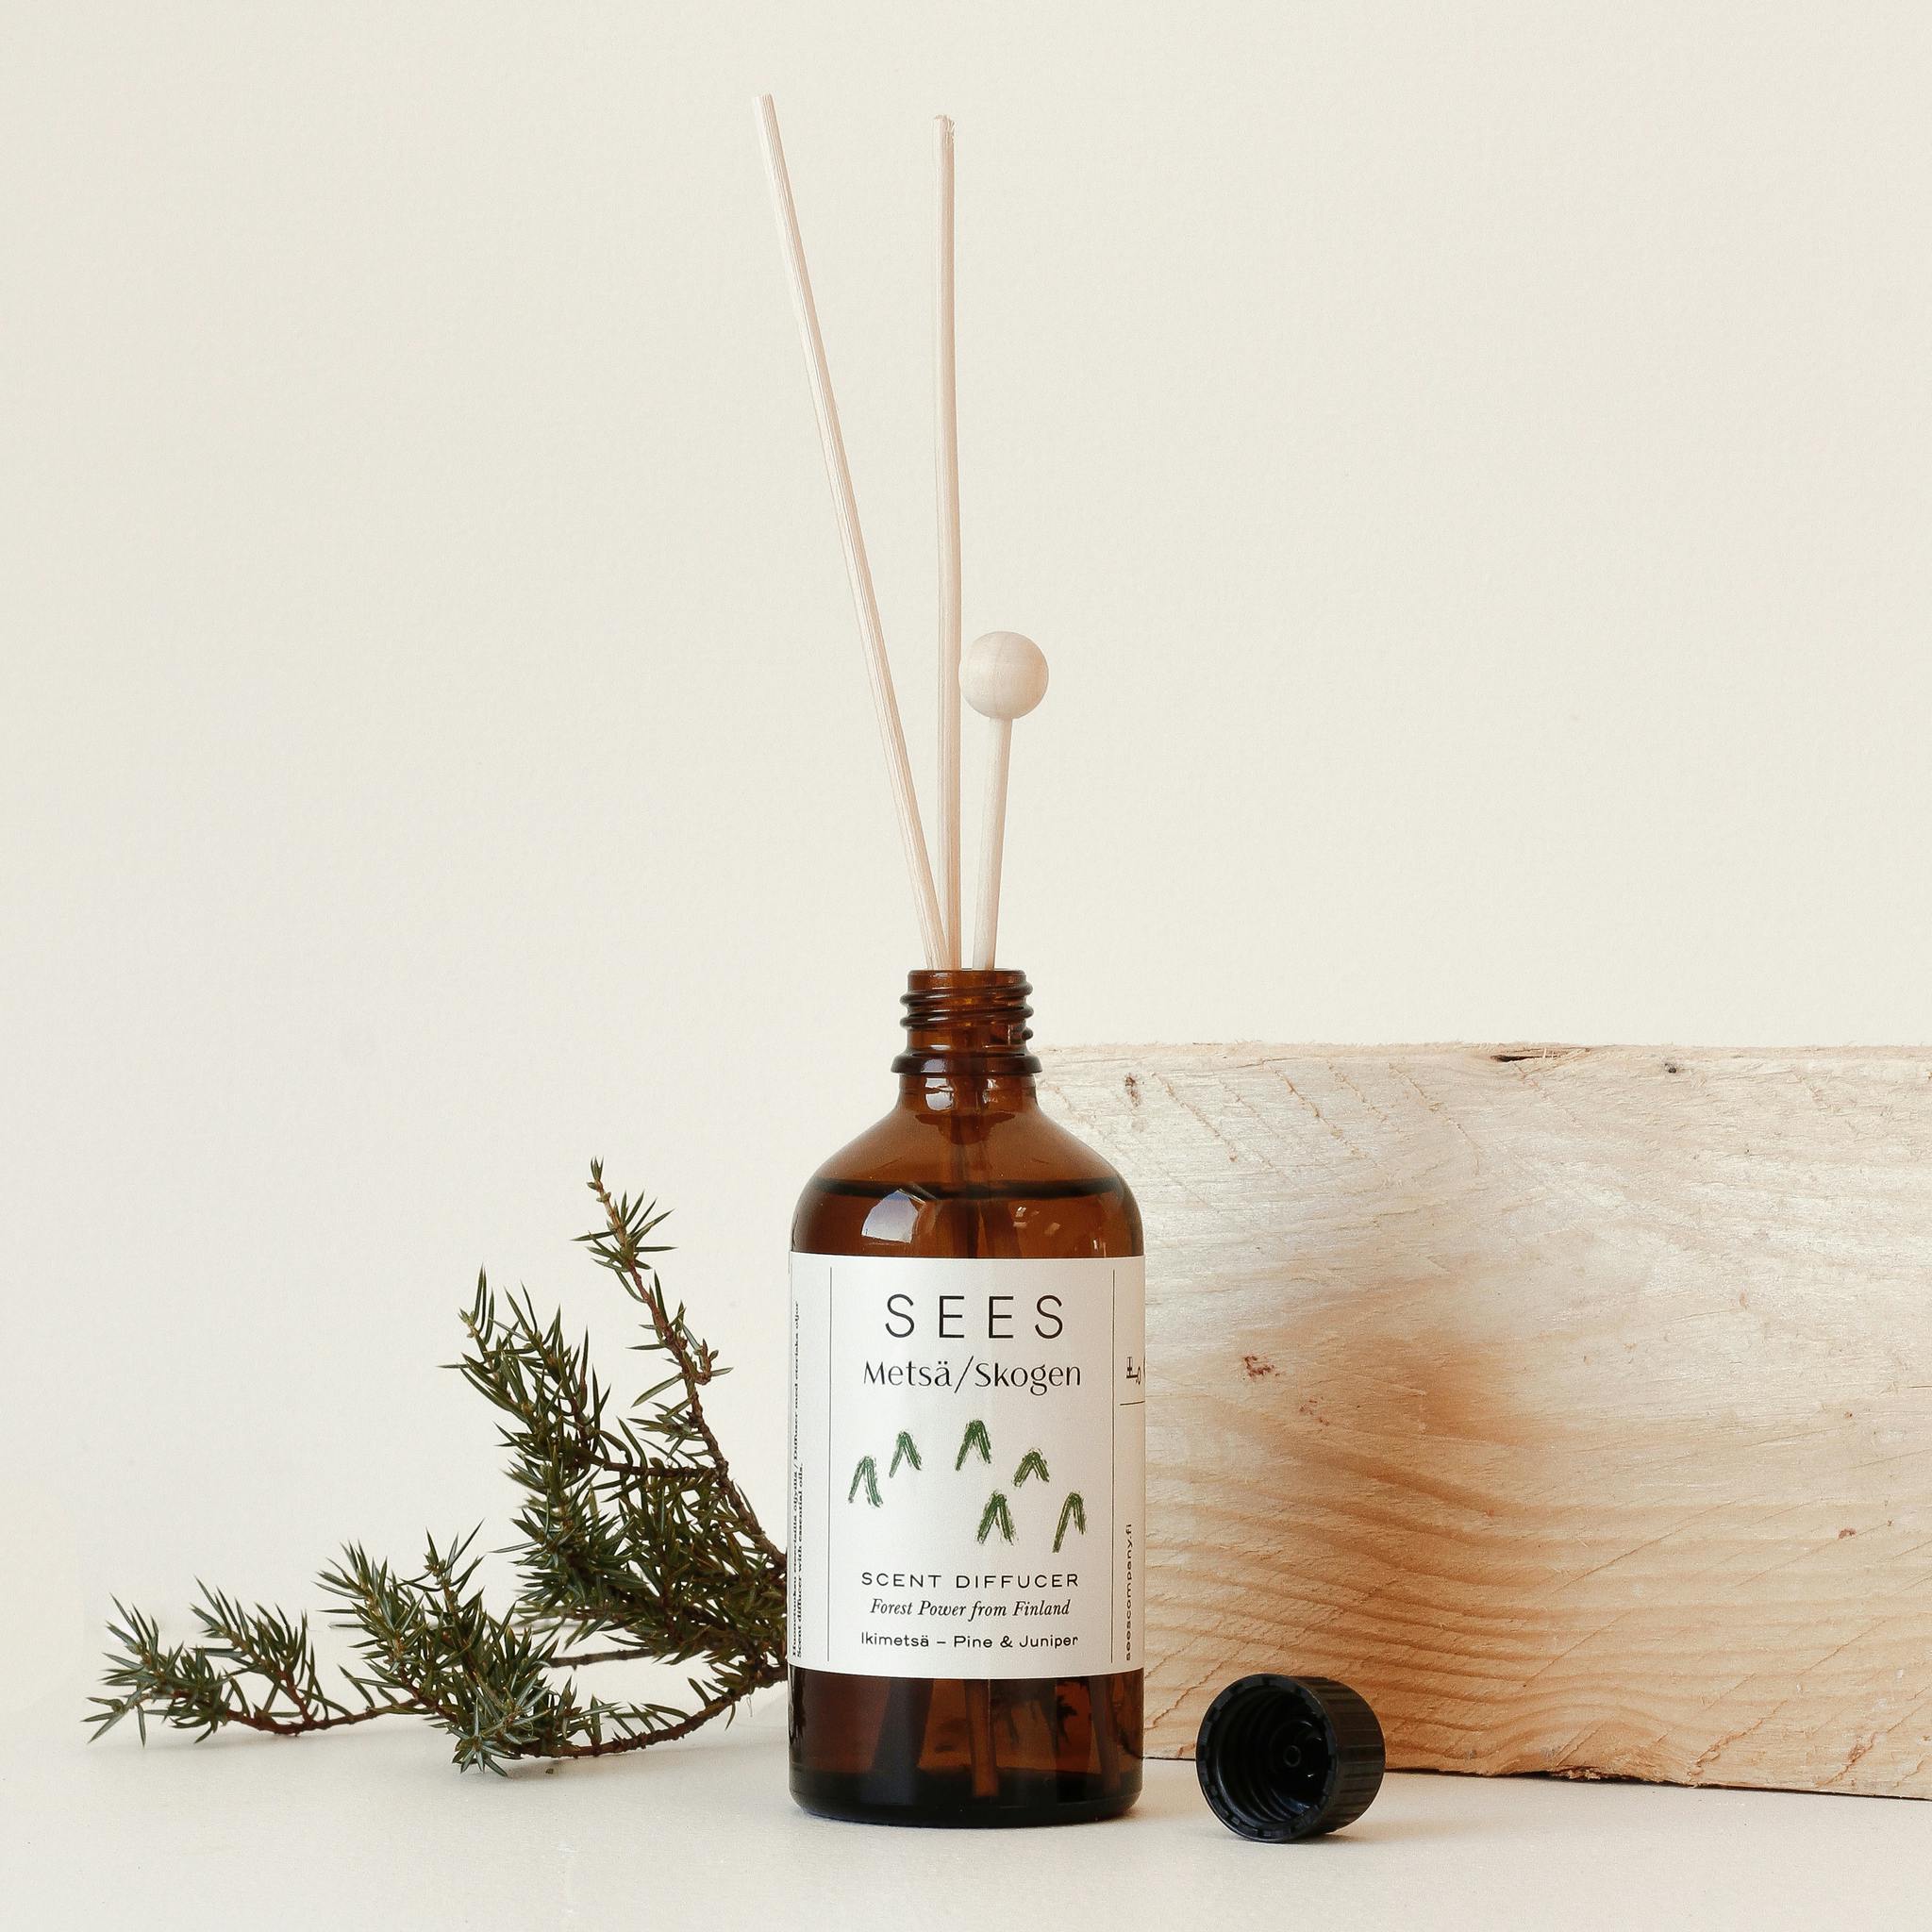 Room diffuser, natural scents, organic, Nordic design, Finnish products, forest scent